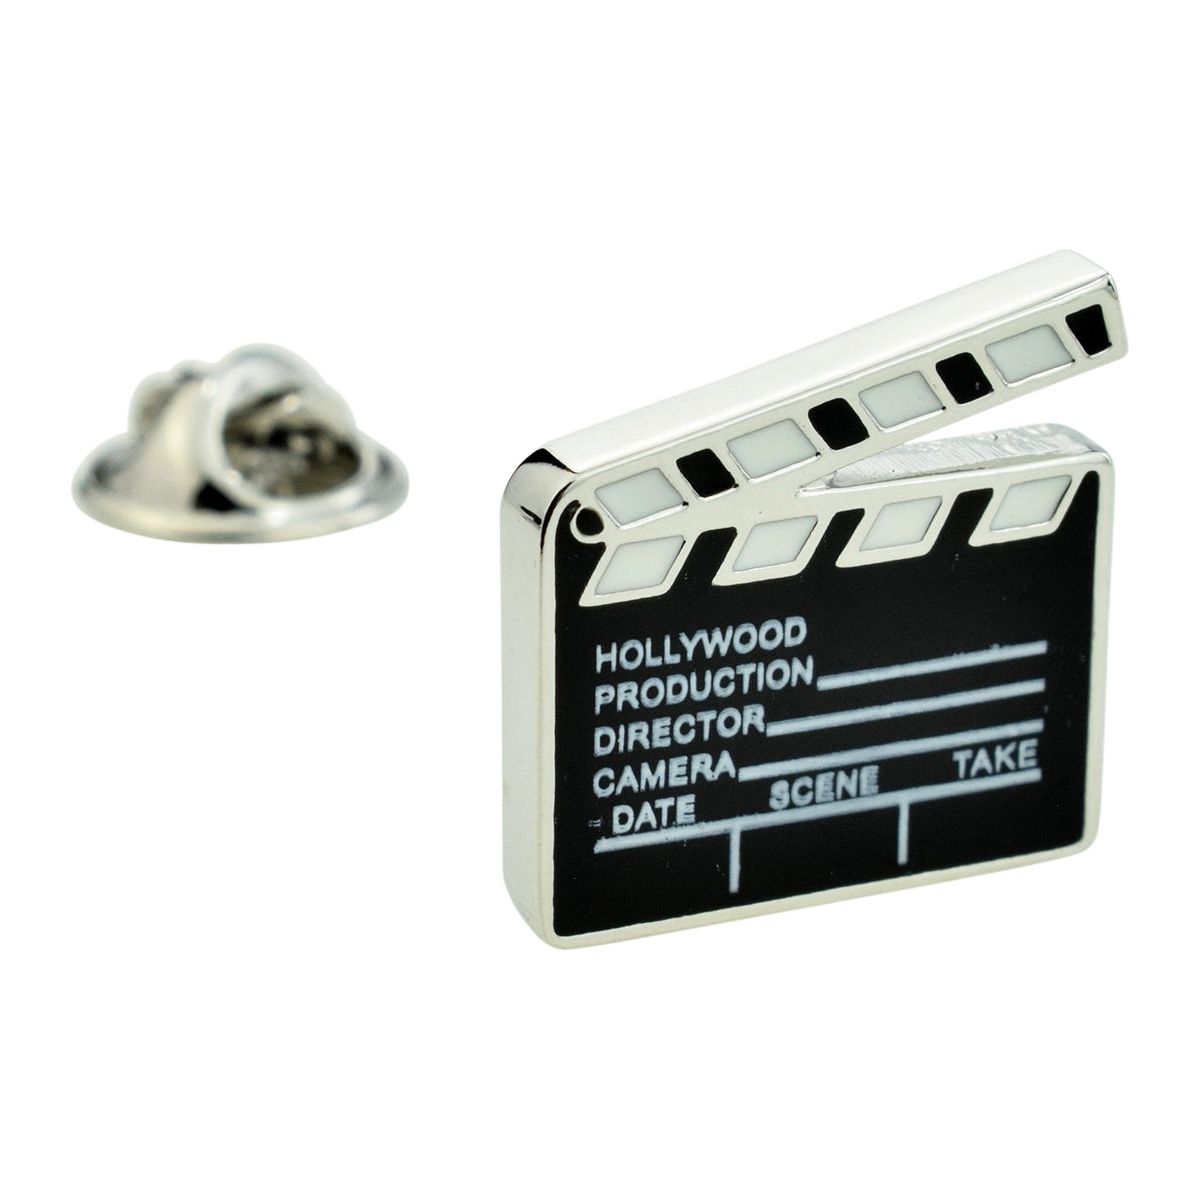 Hollywood Film Clapperboard Lapel Pin badge - Ashton and Finch